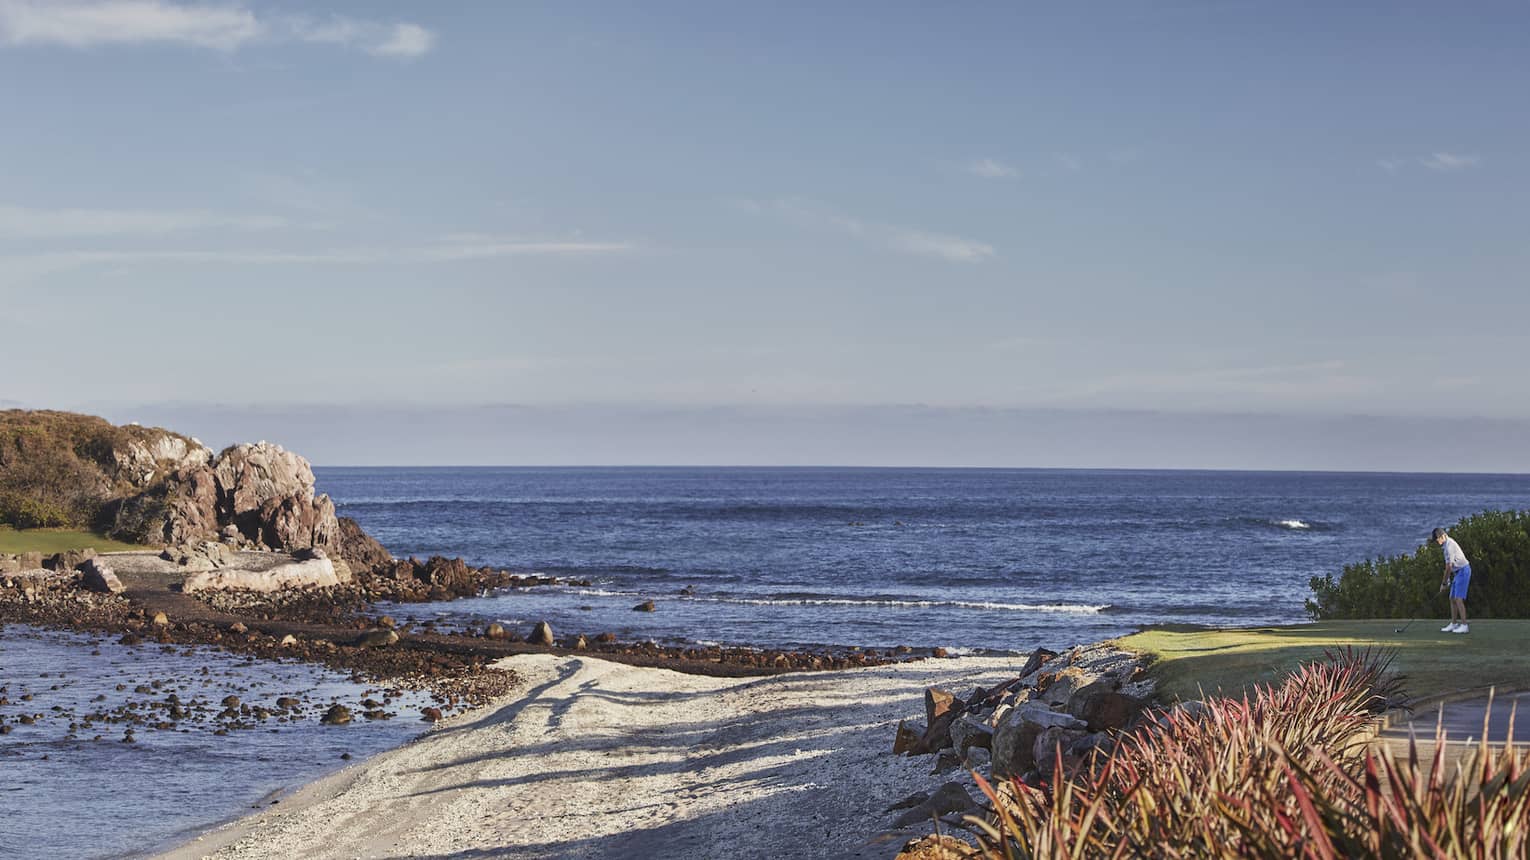 Sweeping view of golf course greens extending onto rocky island along coast